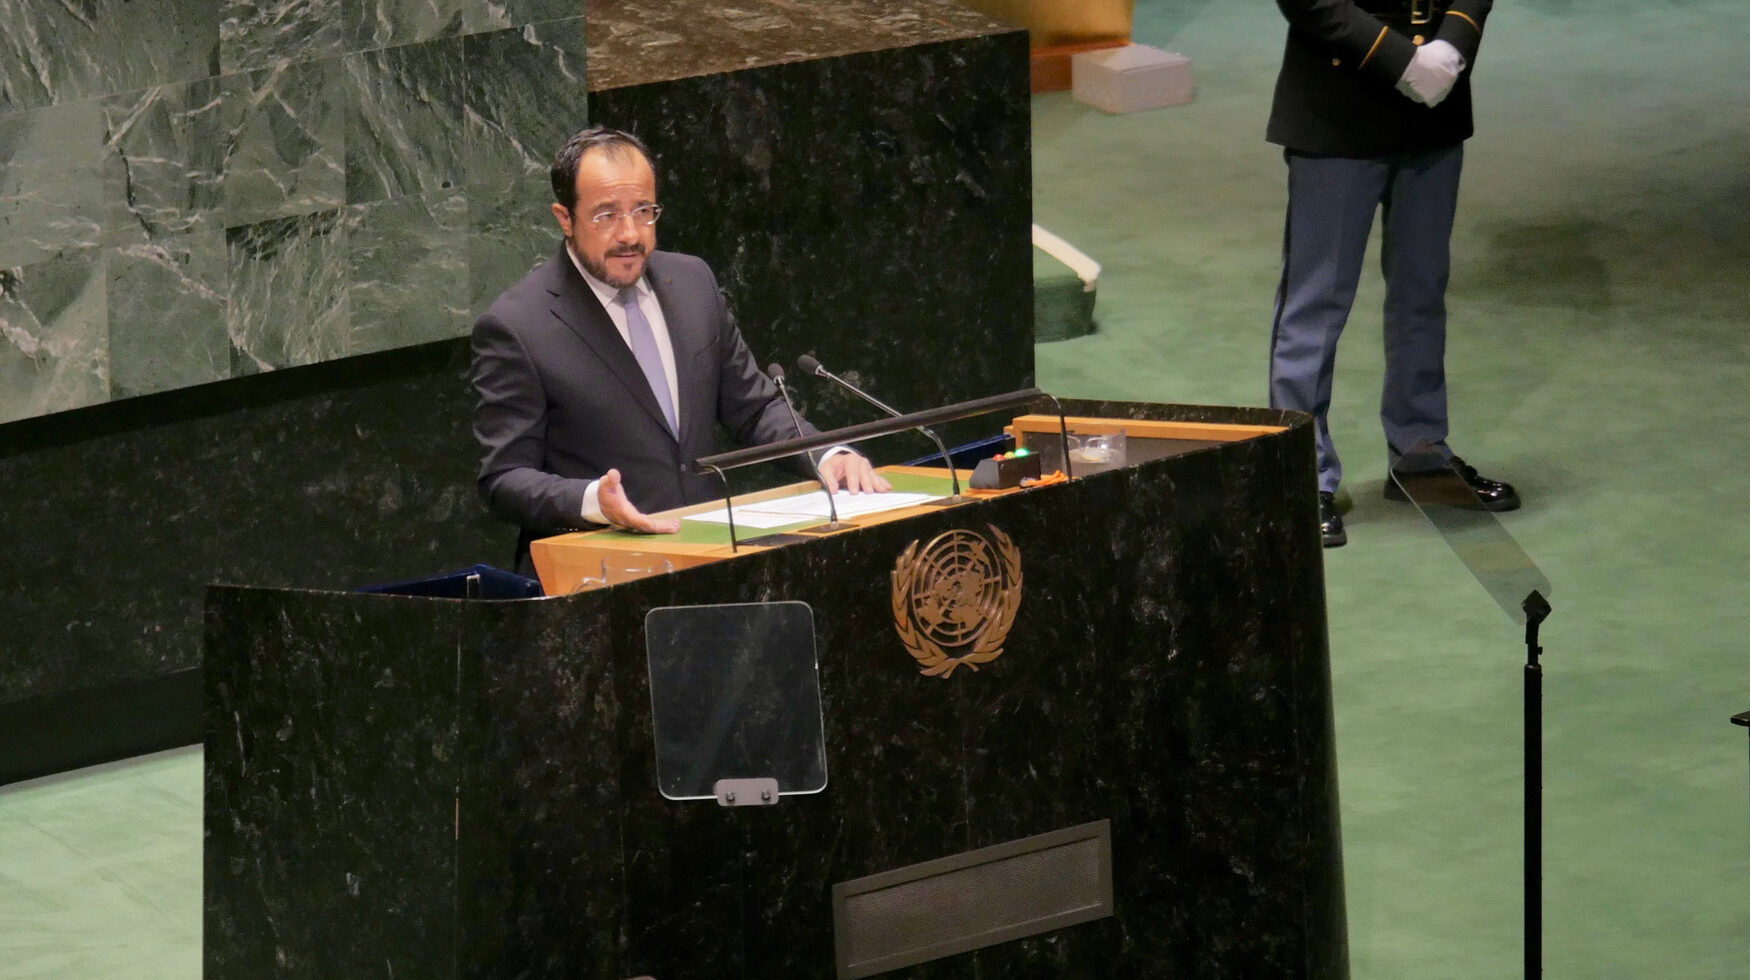 Cyprus' President Nikos Christodoulides addressed Erdogan at the 78th session of the UN General Assembly